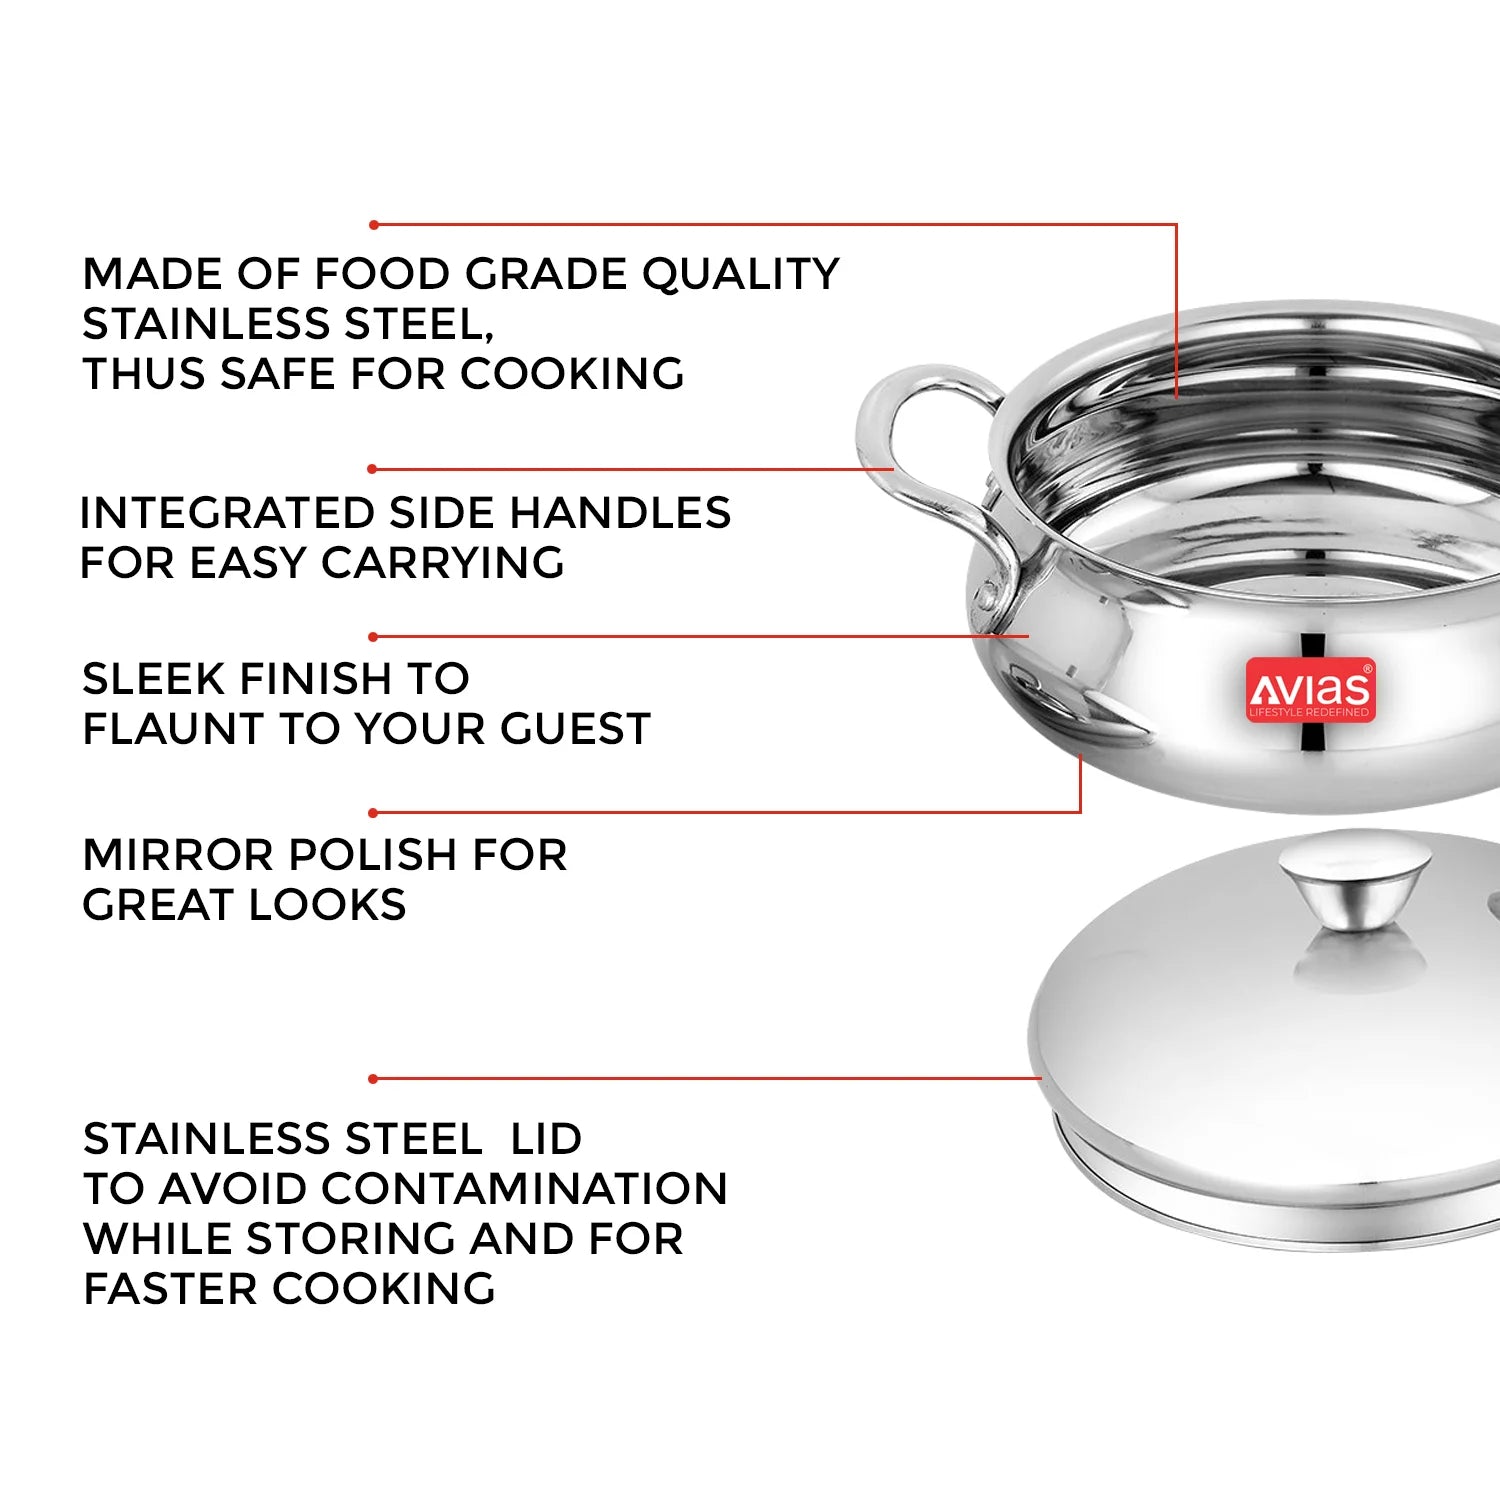 AVIAS Aroma High-quality stainless steel Handi Set made of features